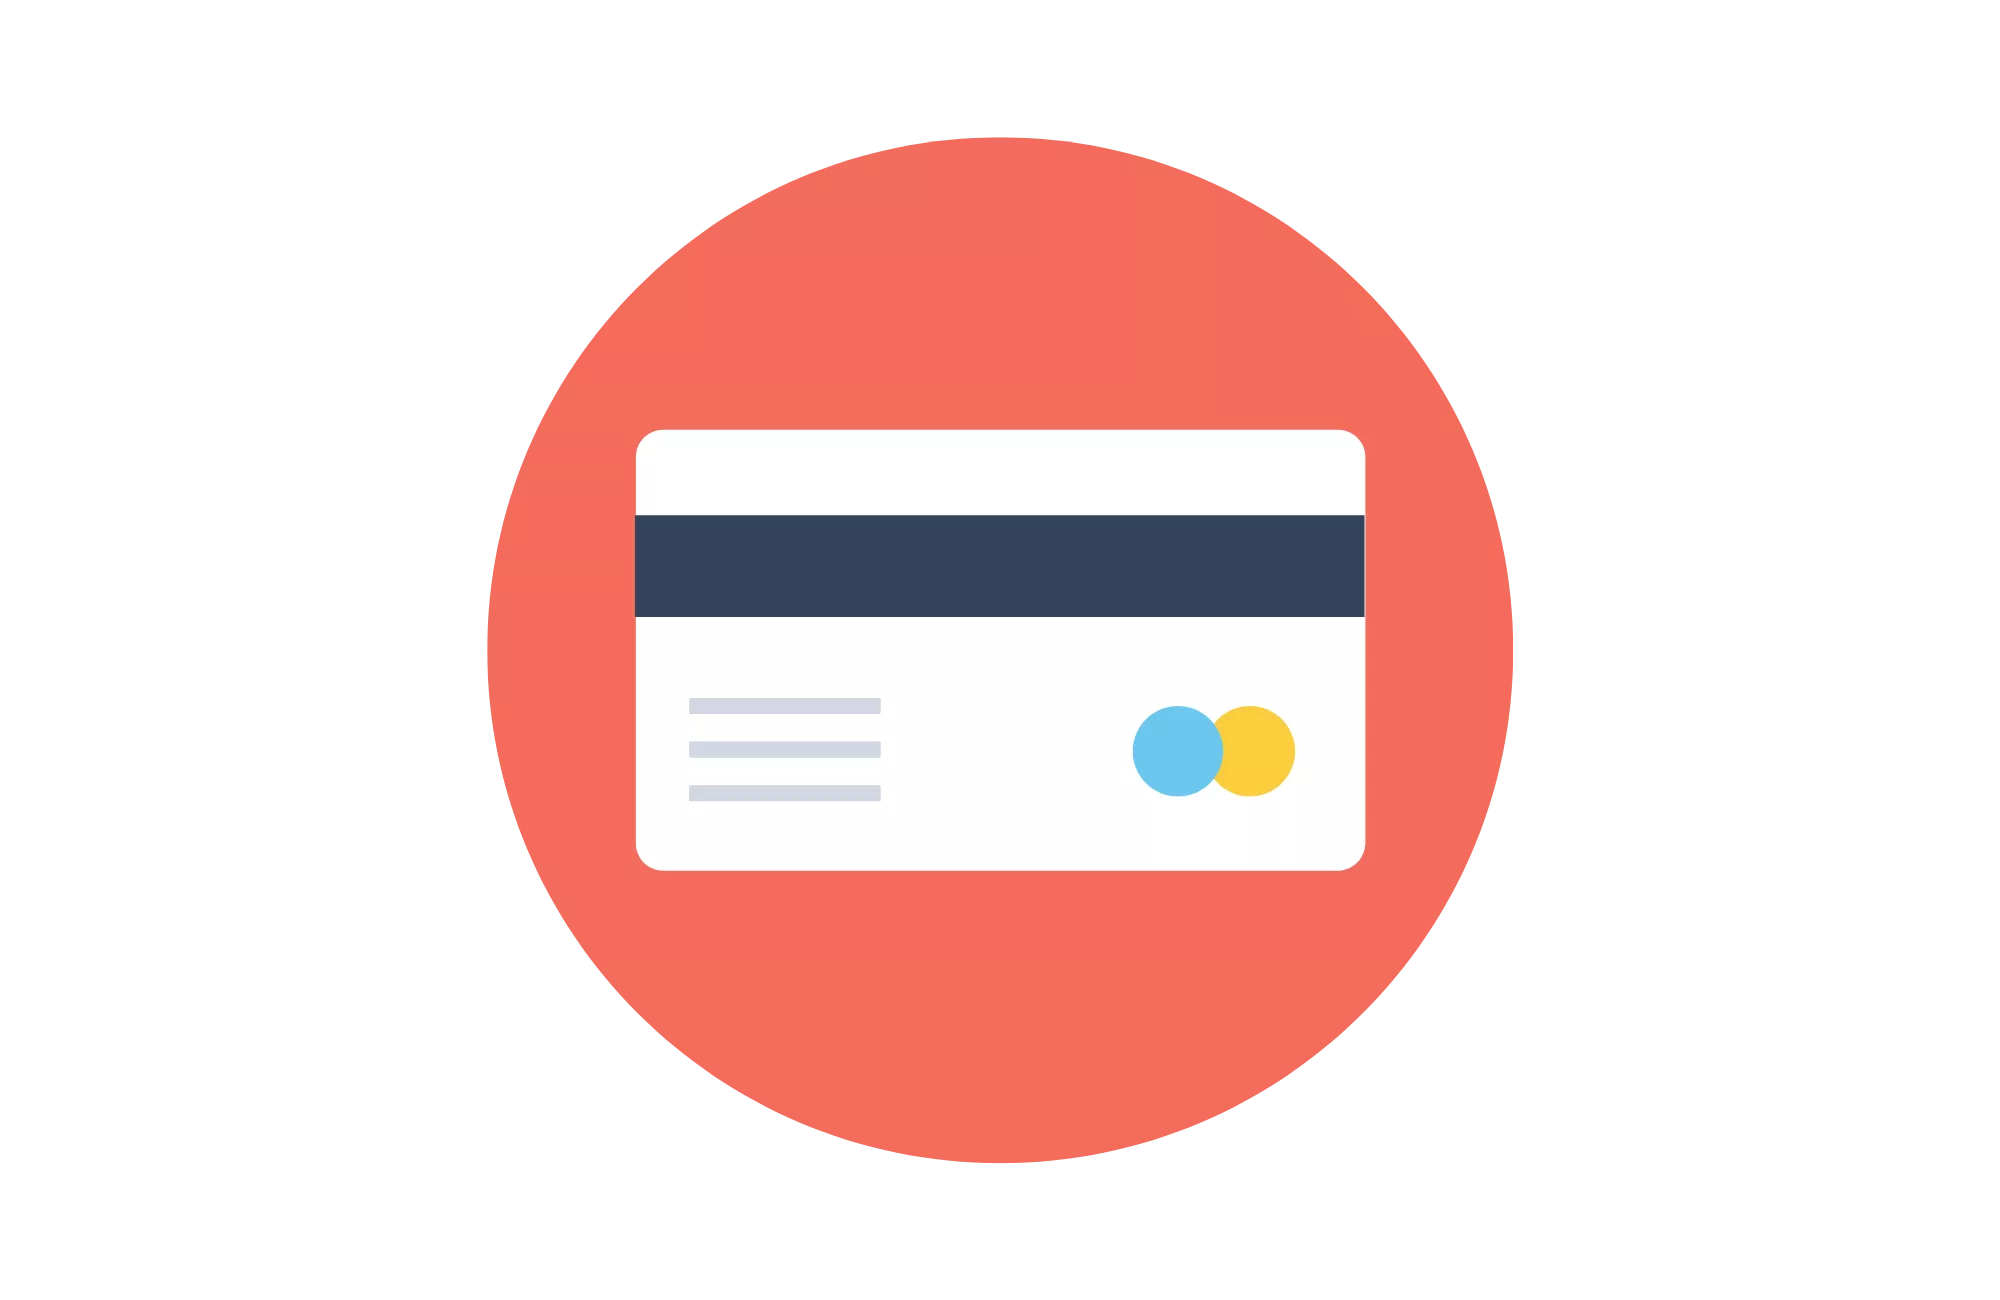 credit card graphic to show you can accept payments when fighting chargebacks